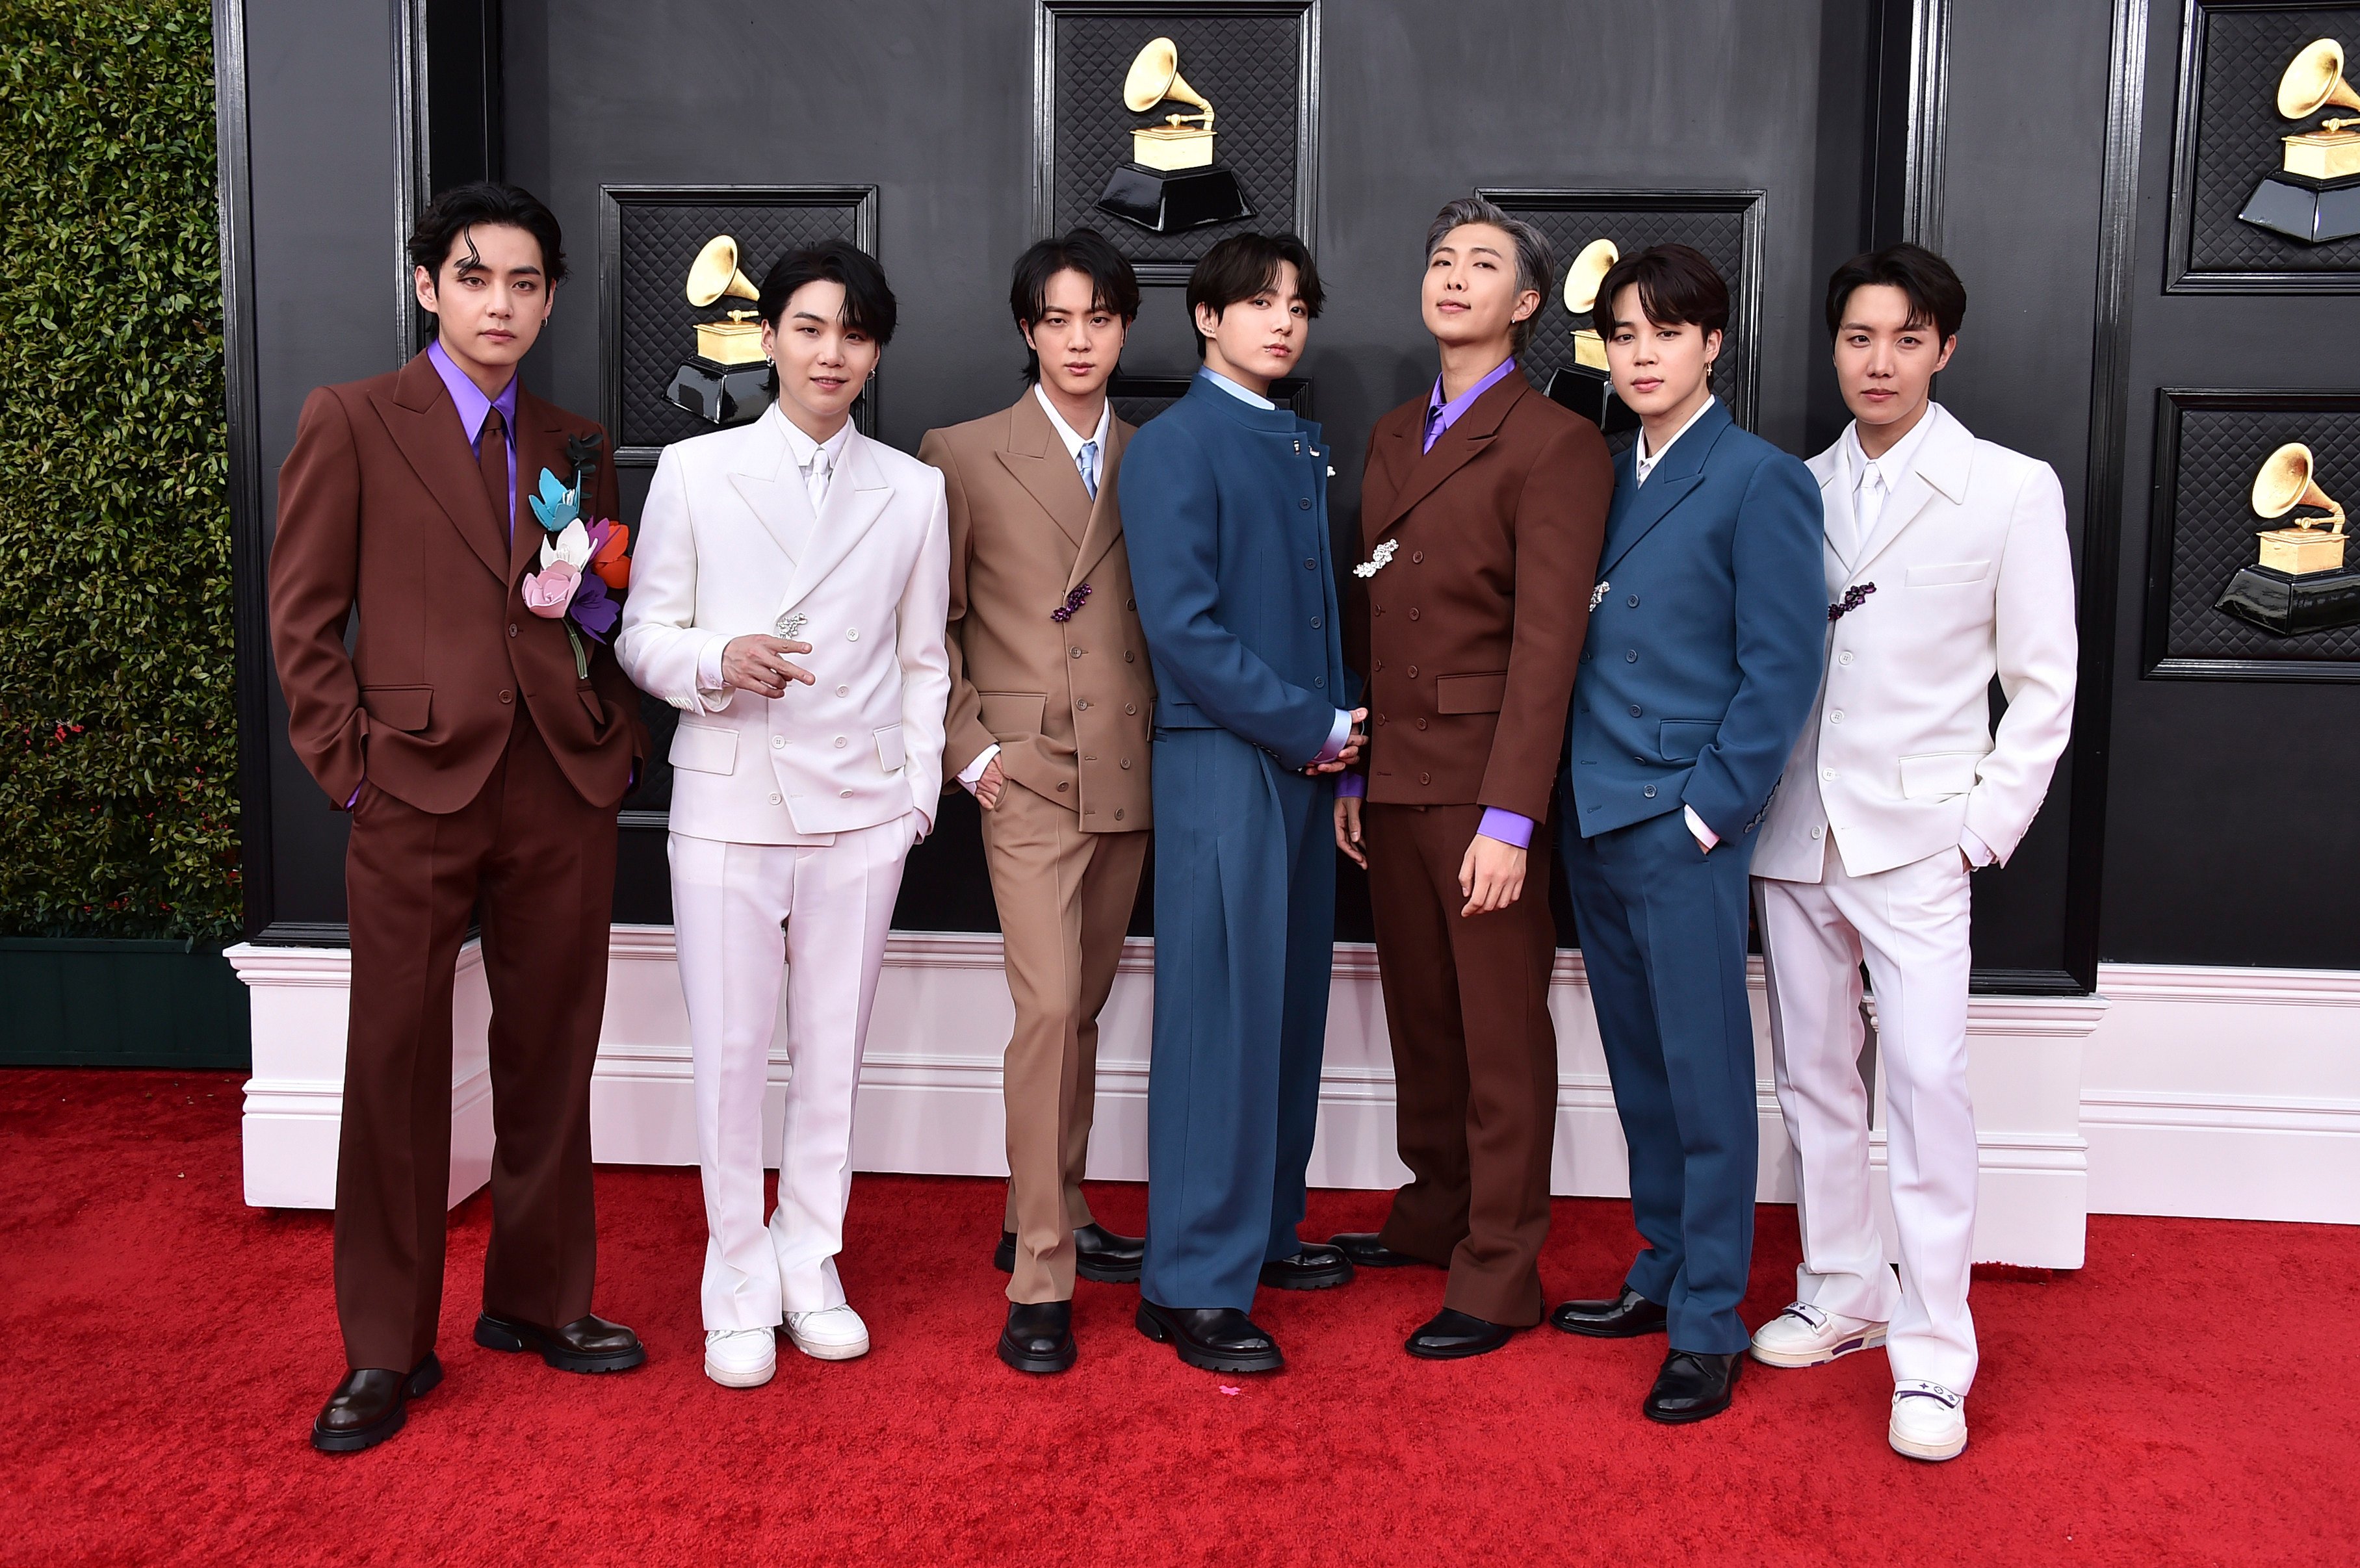 BTS at the 64th Annual Grammy Awards in Las Vegas on April 3, 2022. Photo: Jordan Strauss/Invision/AP